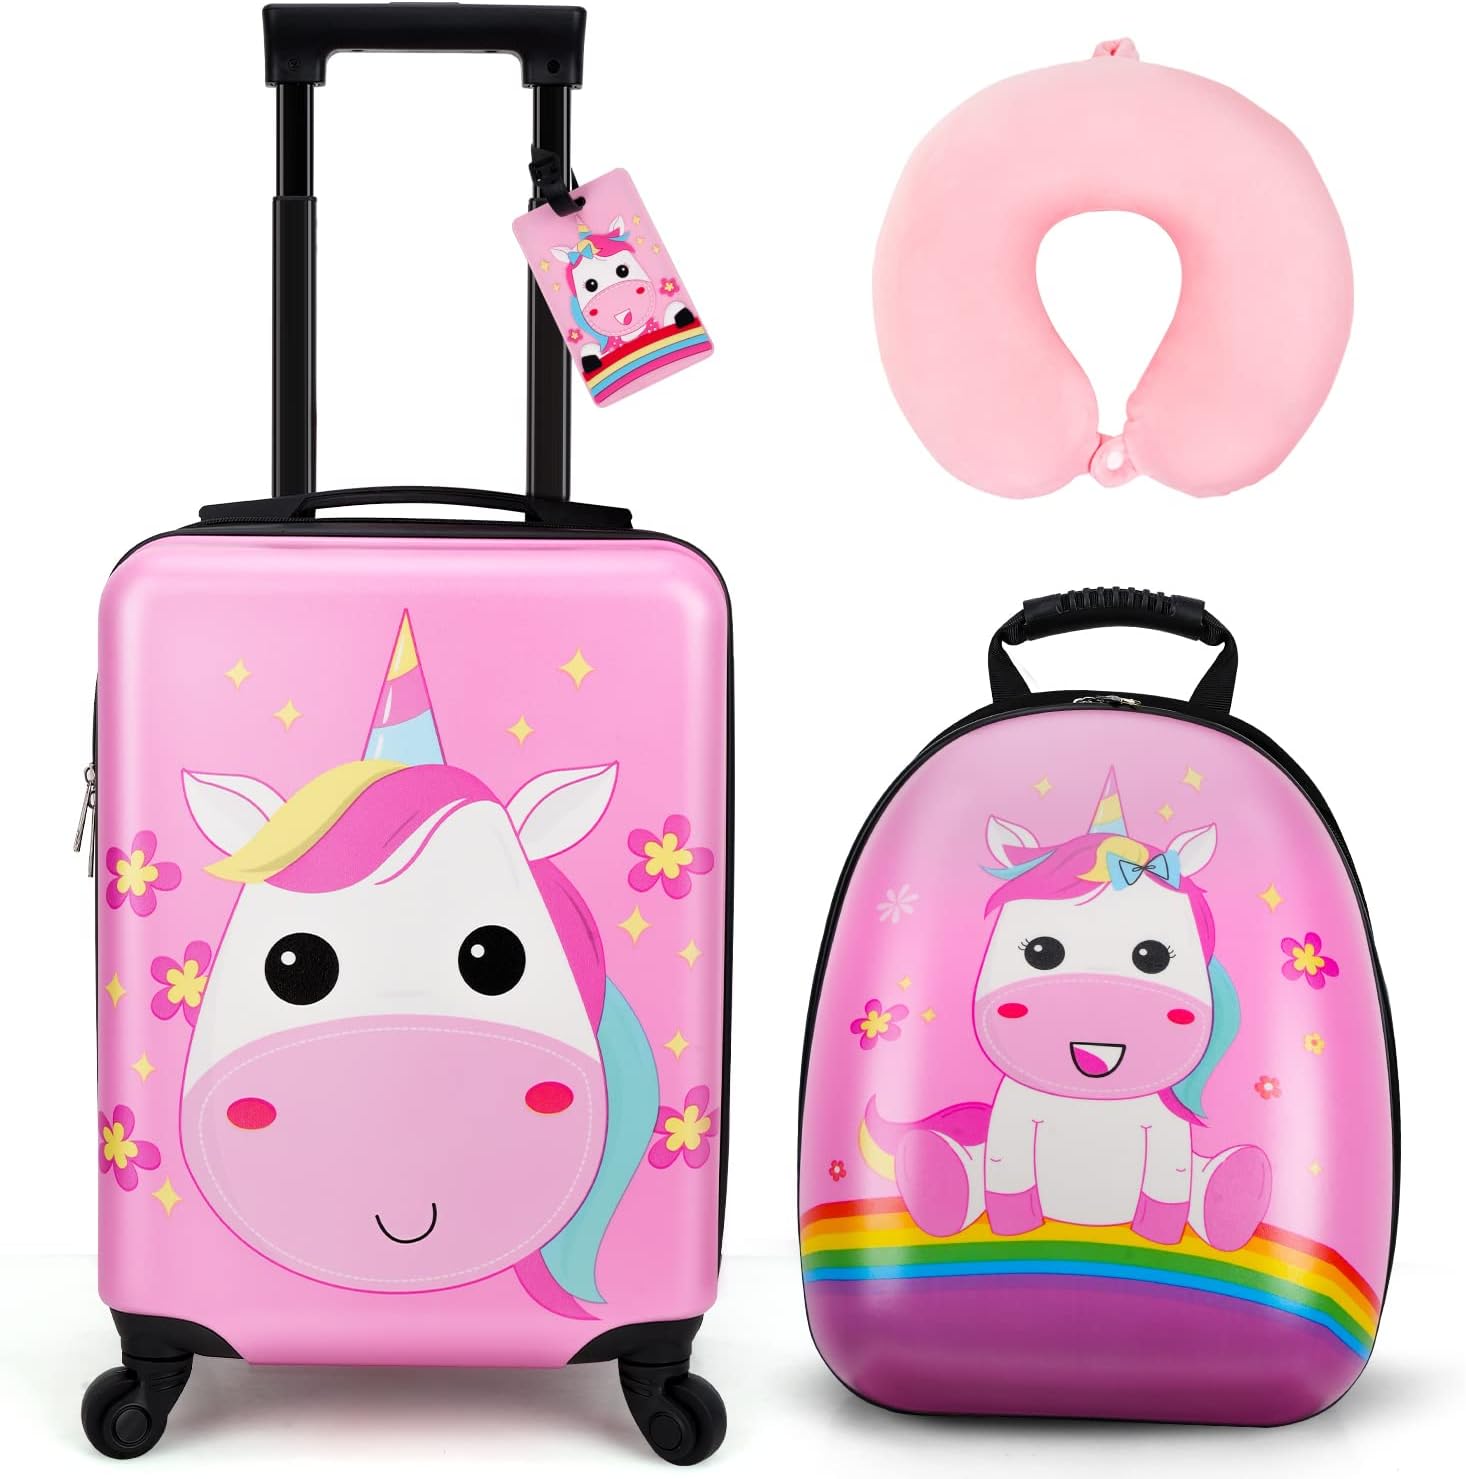 emissary Kids Luggage With Wheels For Girls, Unicorn Kids Luggage Set, Childrens Luggage For Girls With Wheels, Kids Suitcases With Wheels For Girl, Toddler Suitcase For Girls, Travel Luggage For Kids